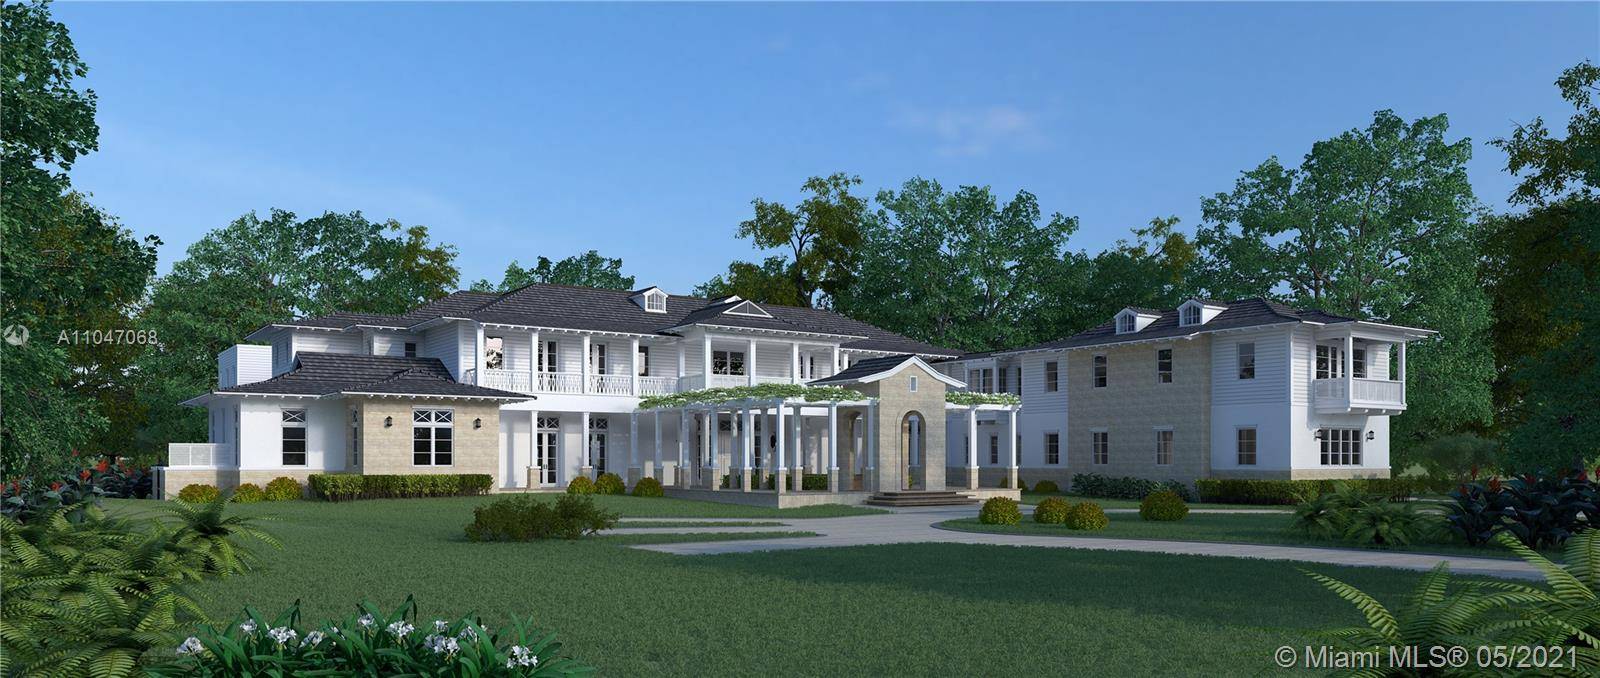 Snapper Creek meets Harbor Island in this newly built British Colonial inspired 1.